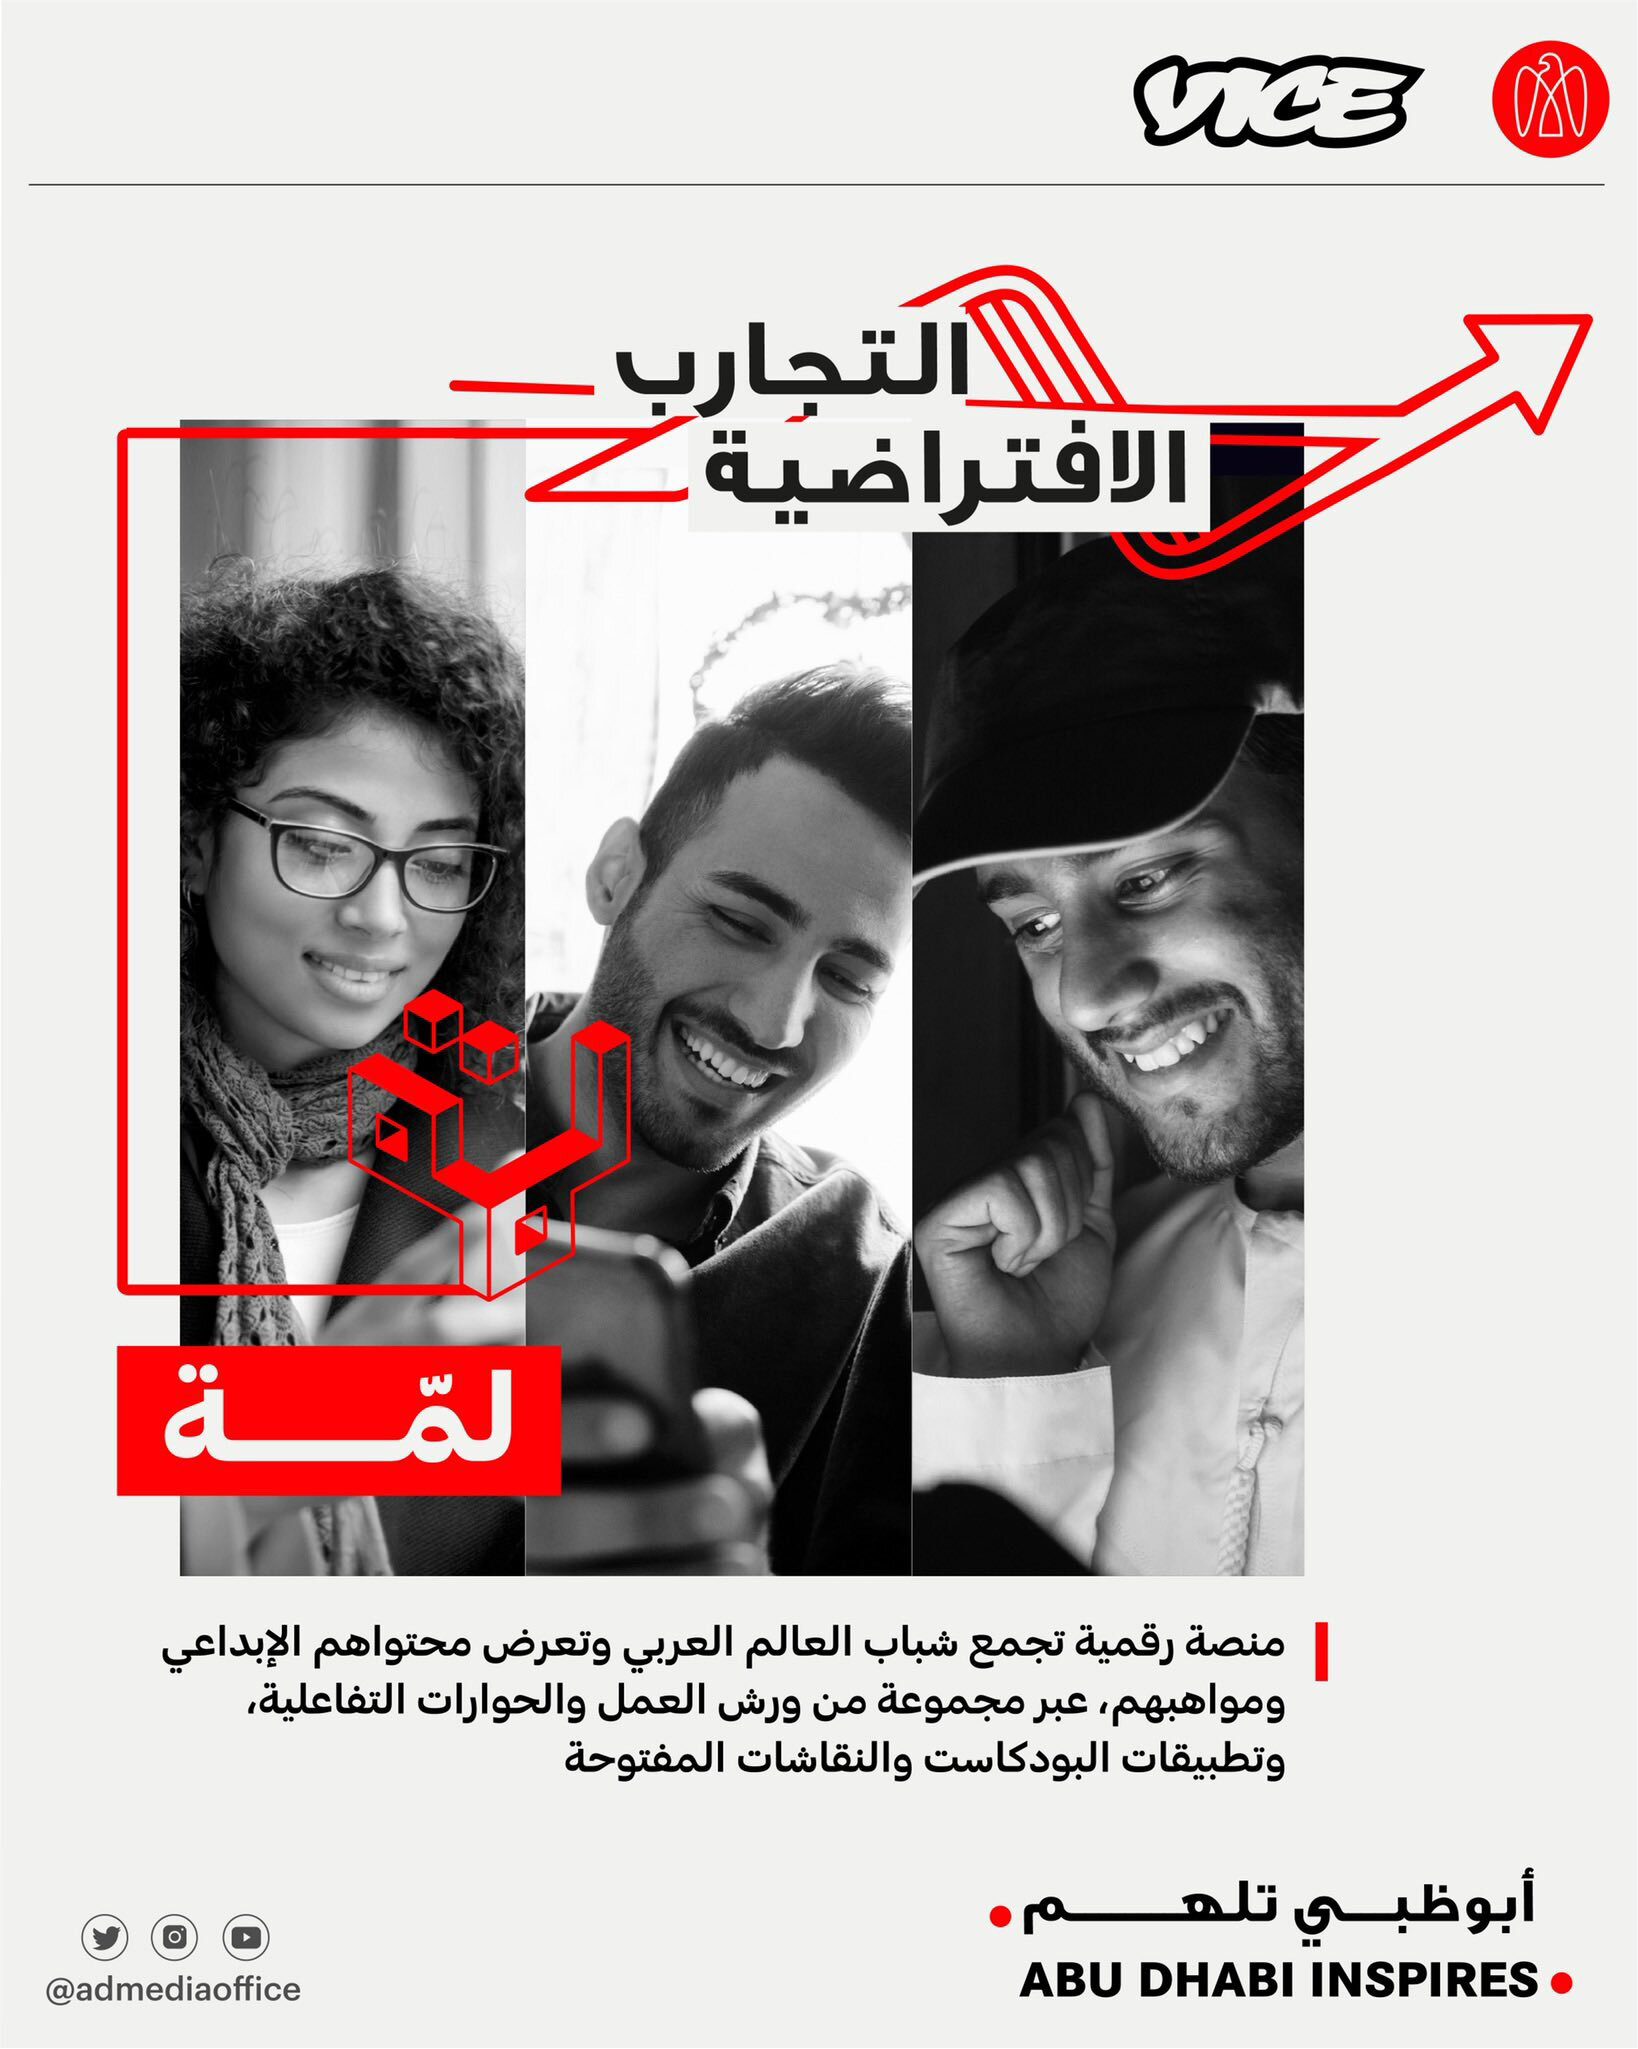 Abu Dhabi Media Office And VICE Media Group To Launch Online Youth Content Platform